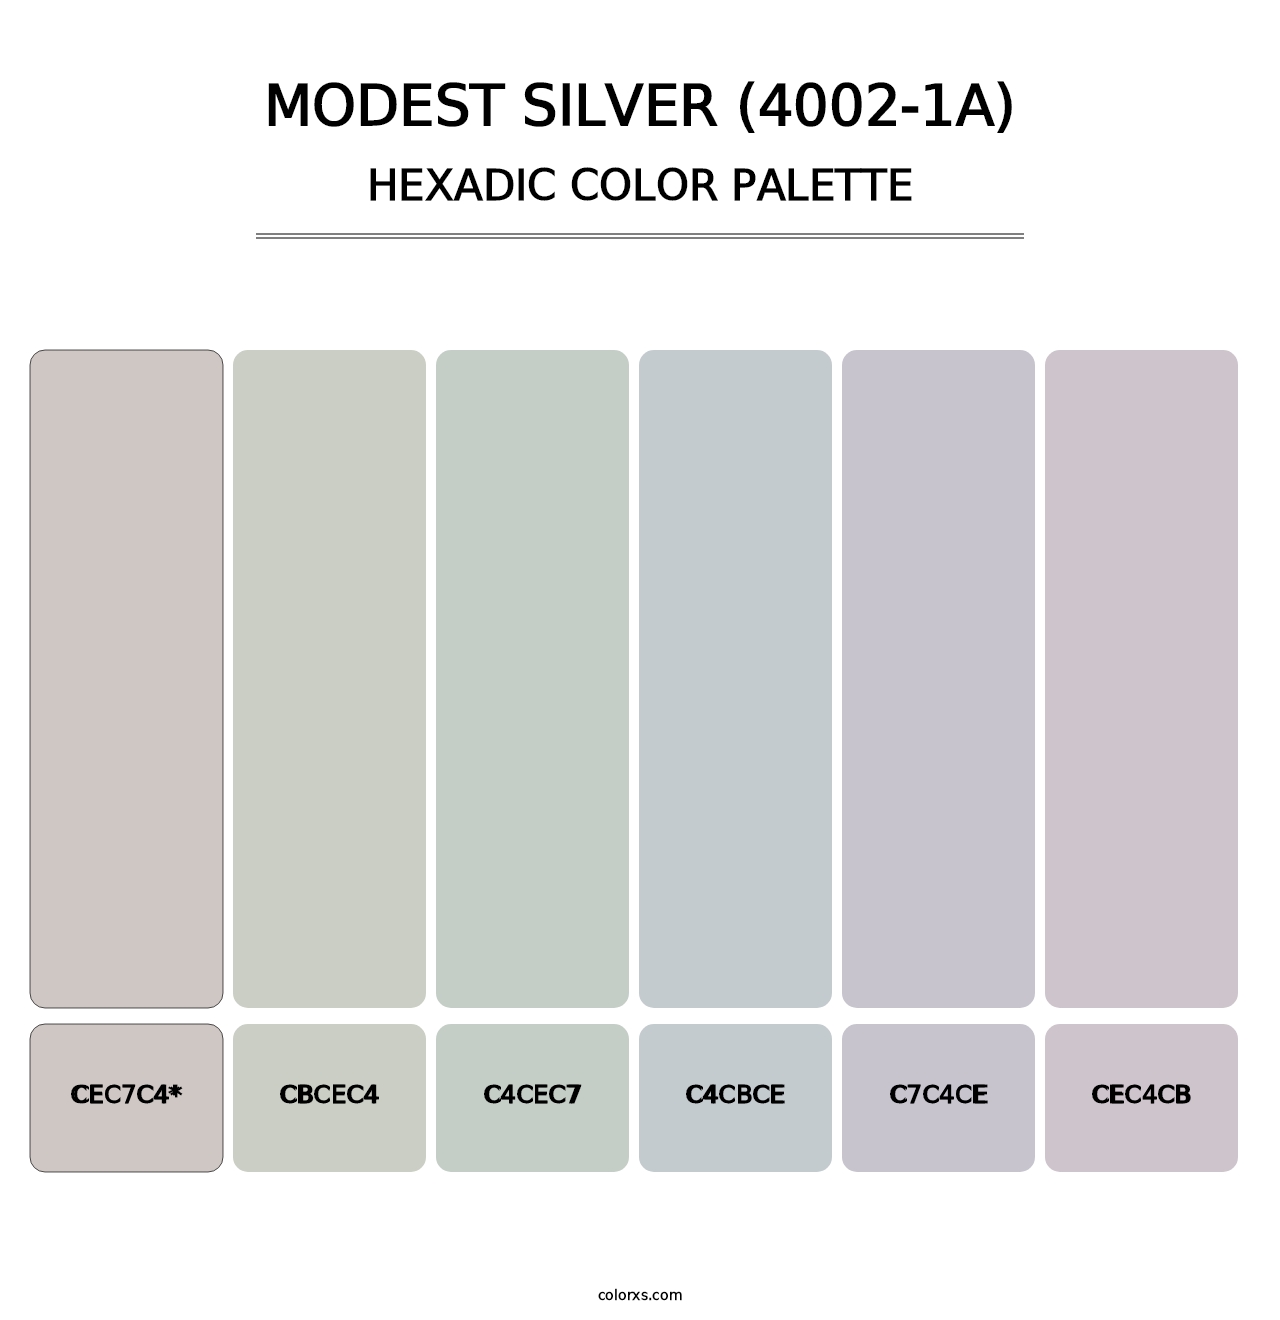 Modest Silver (4002-1A) - Hexadic Color Palette